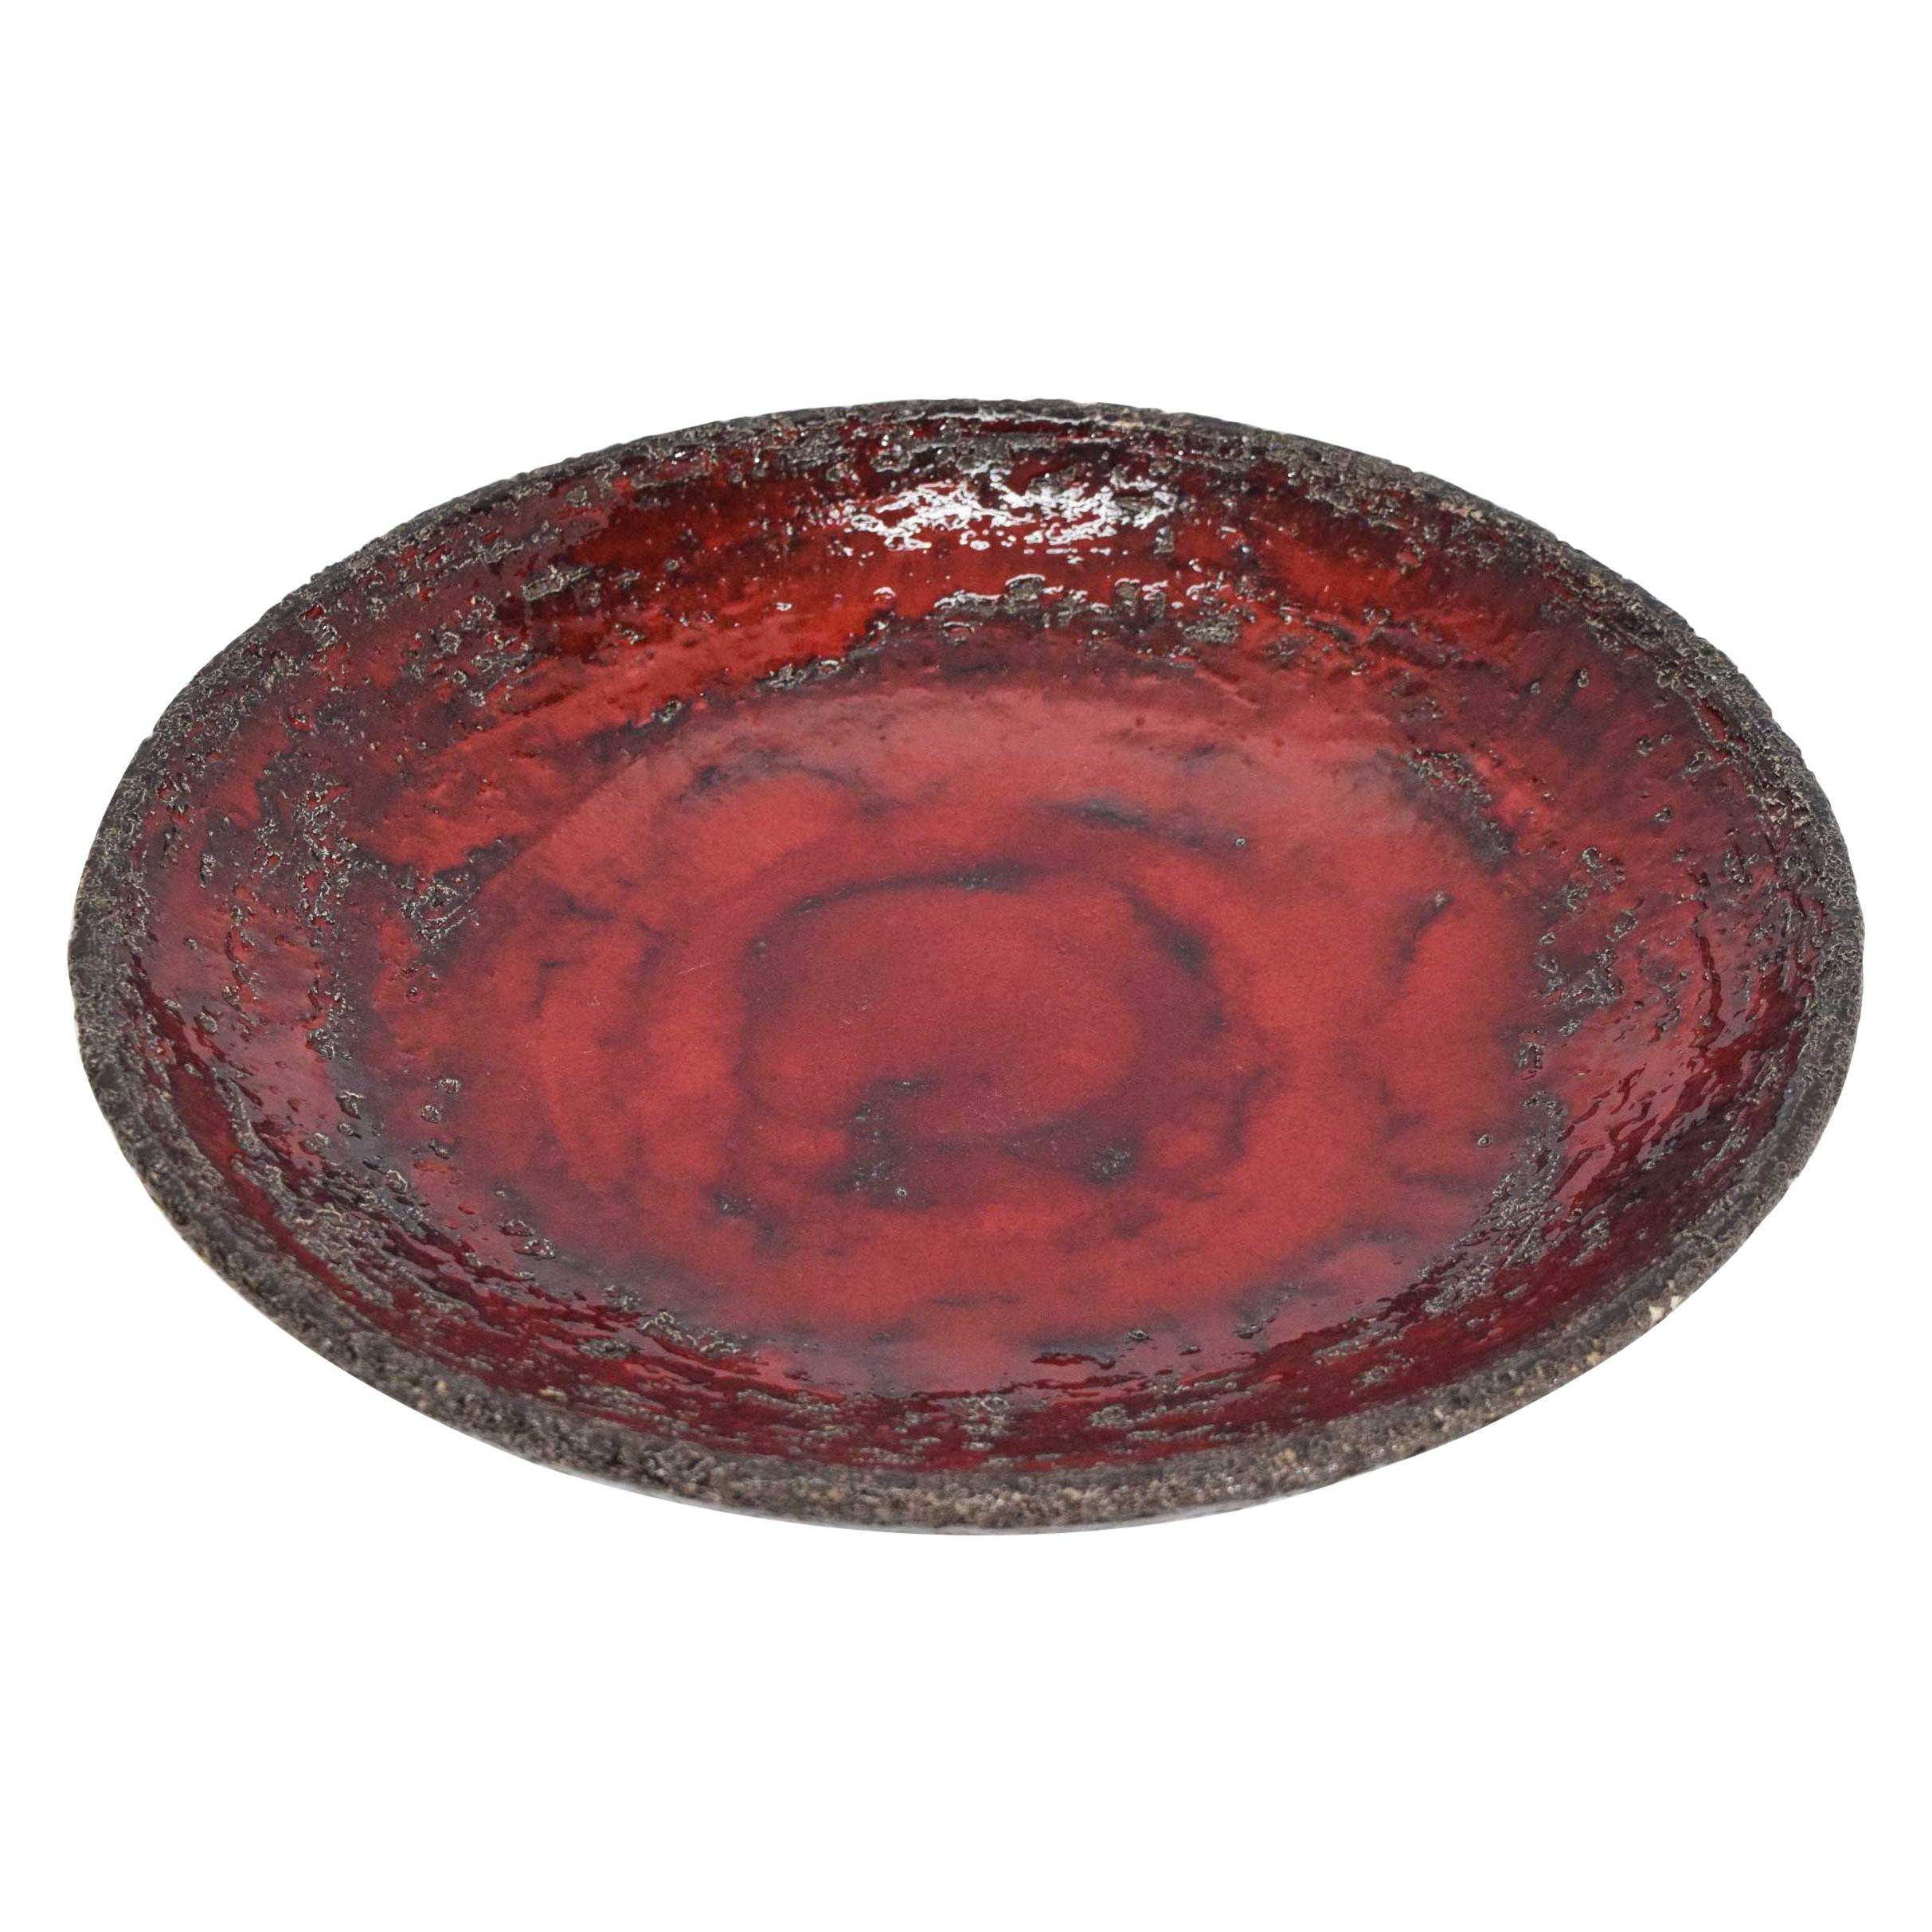 Large Glazed Ceramic Plate, Charge, 1950s